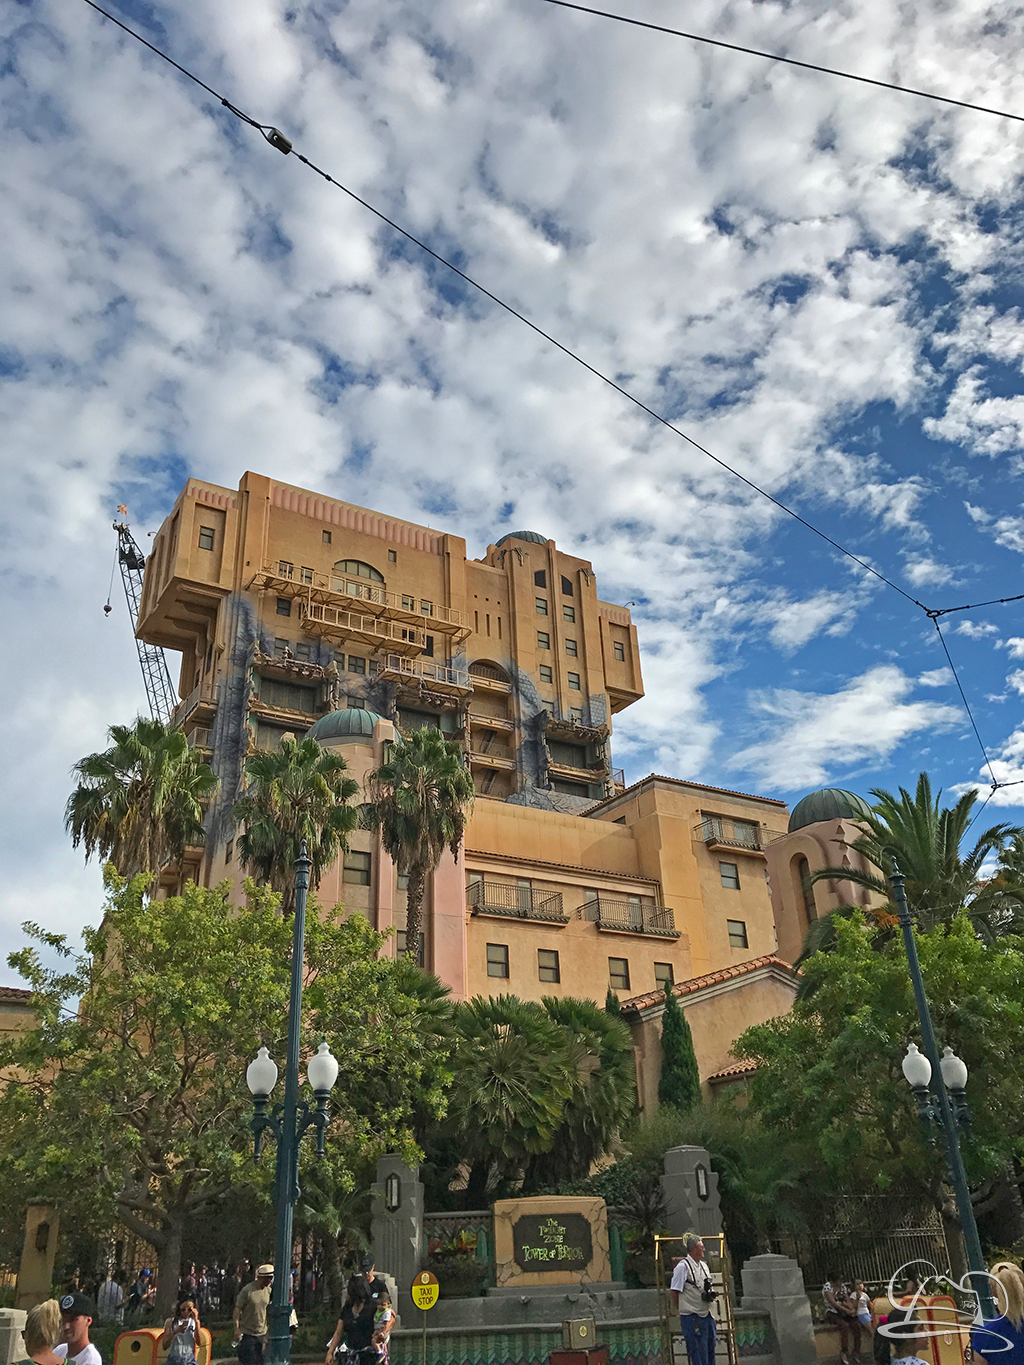 Disney Removes Hollywood Tower Hotel Letters From Tower of Terror